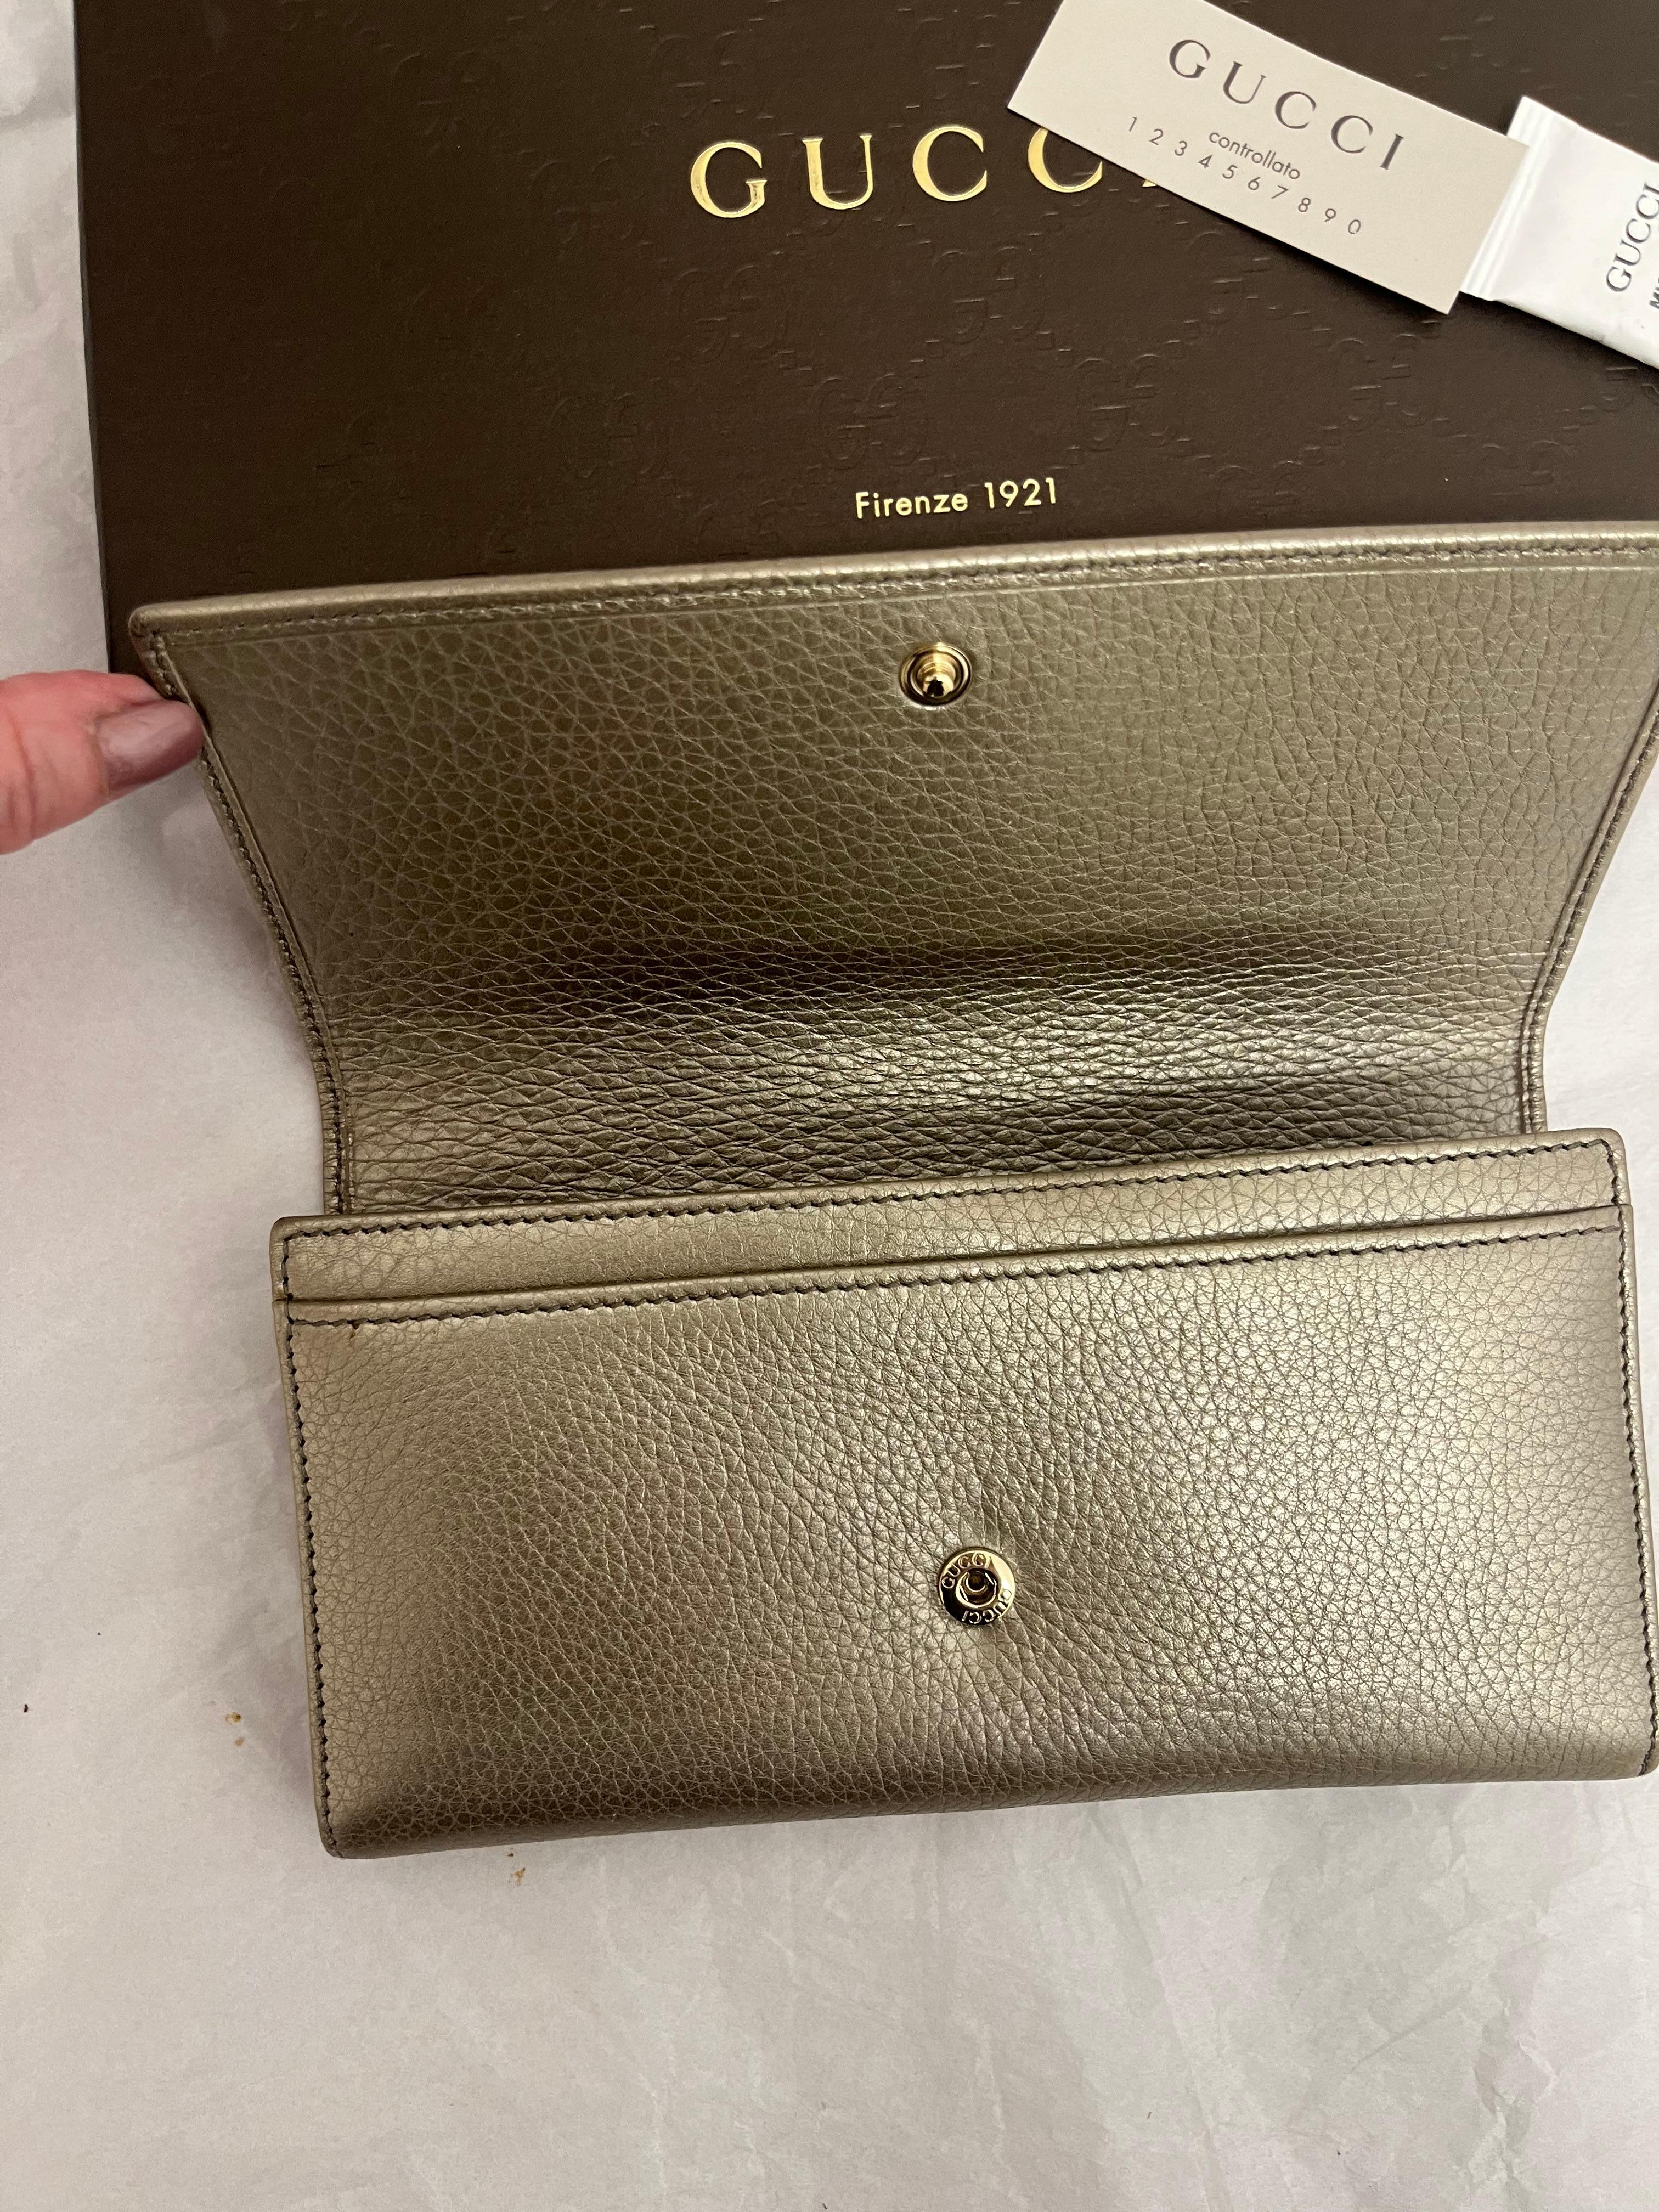 Gucci Cellerius Long Wallet w/Box Never Used 2